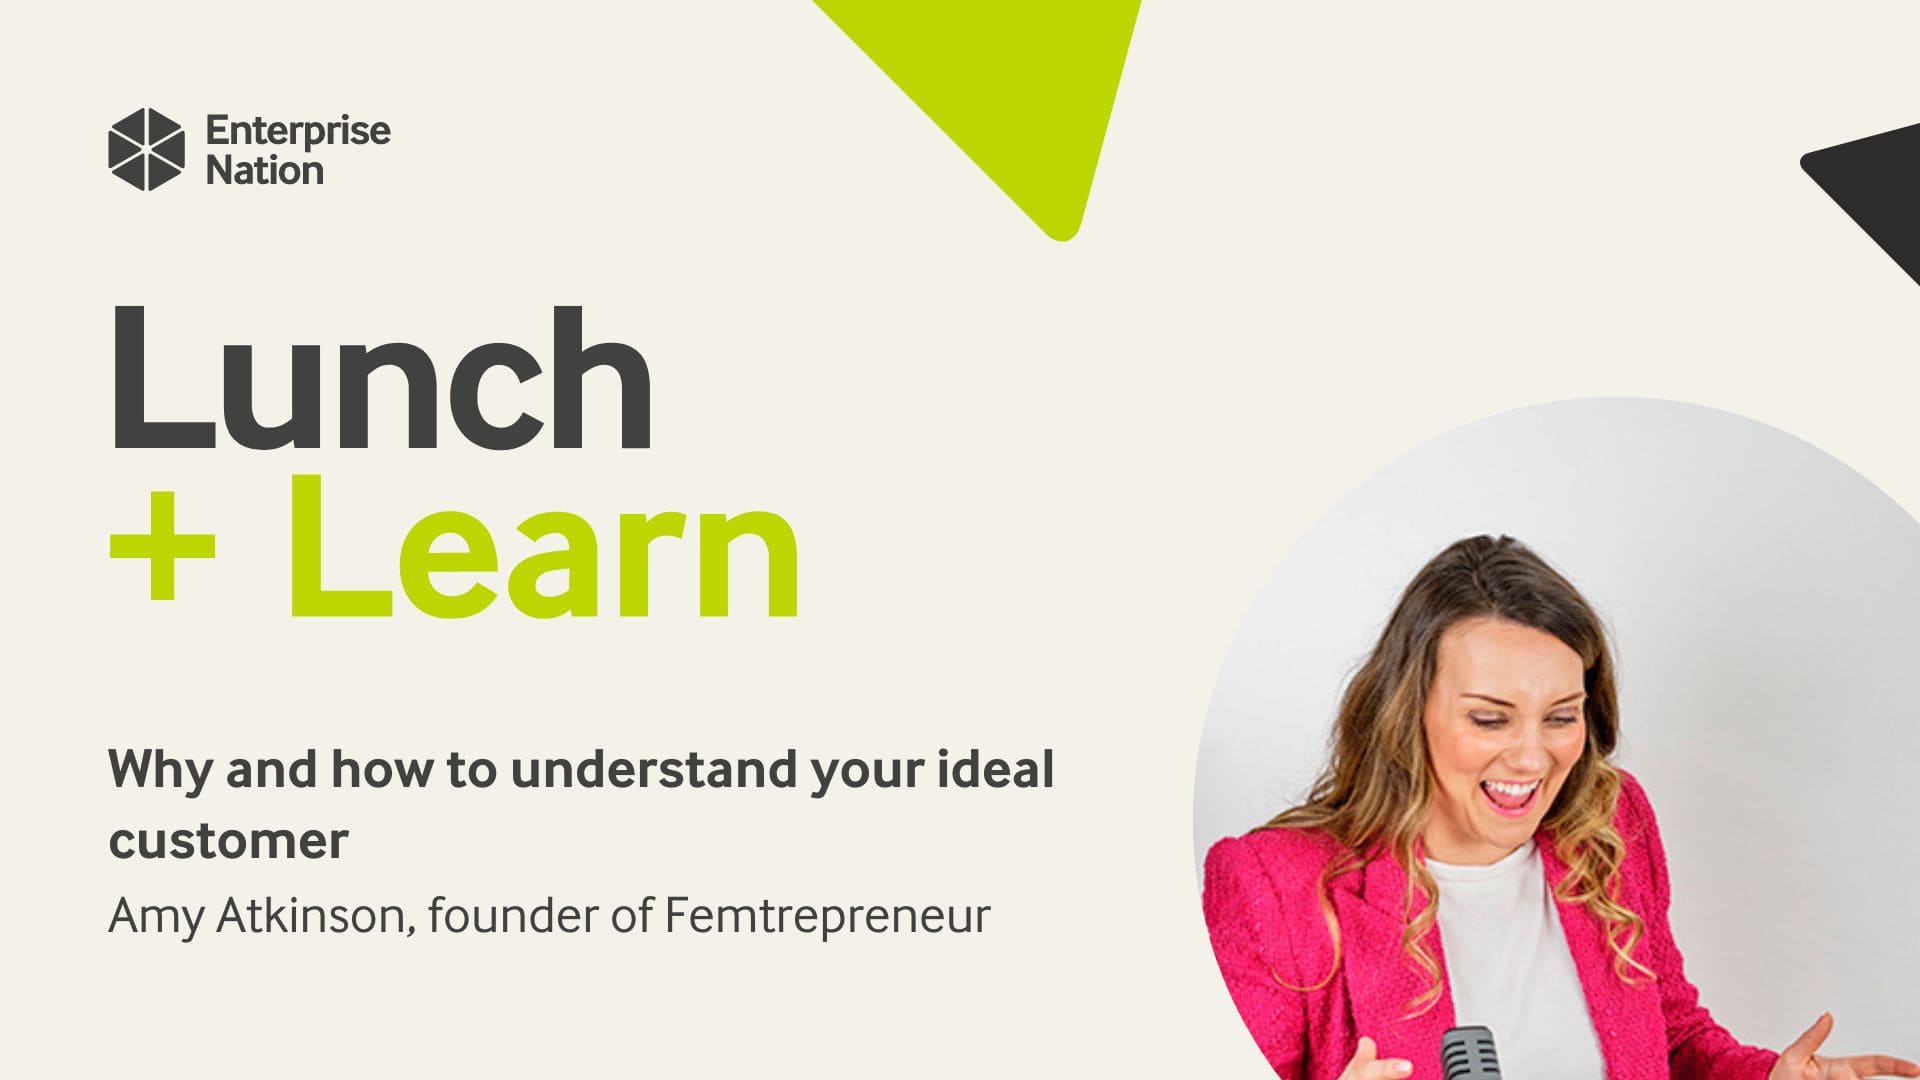 Lunch and Learn: Why and how to understand your ideal customer